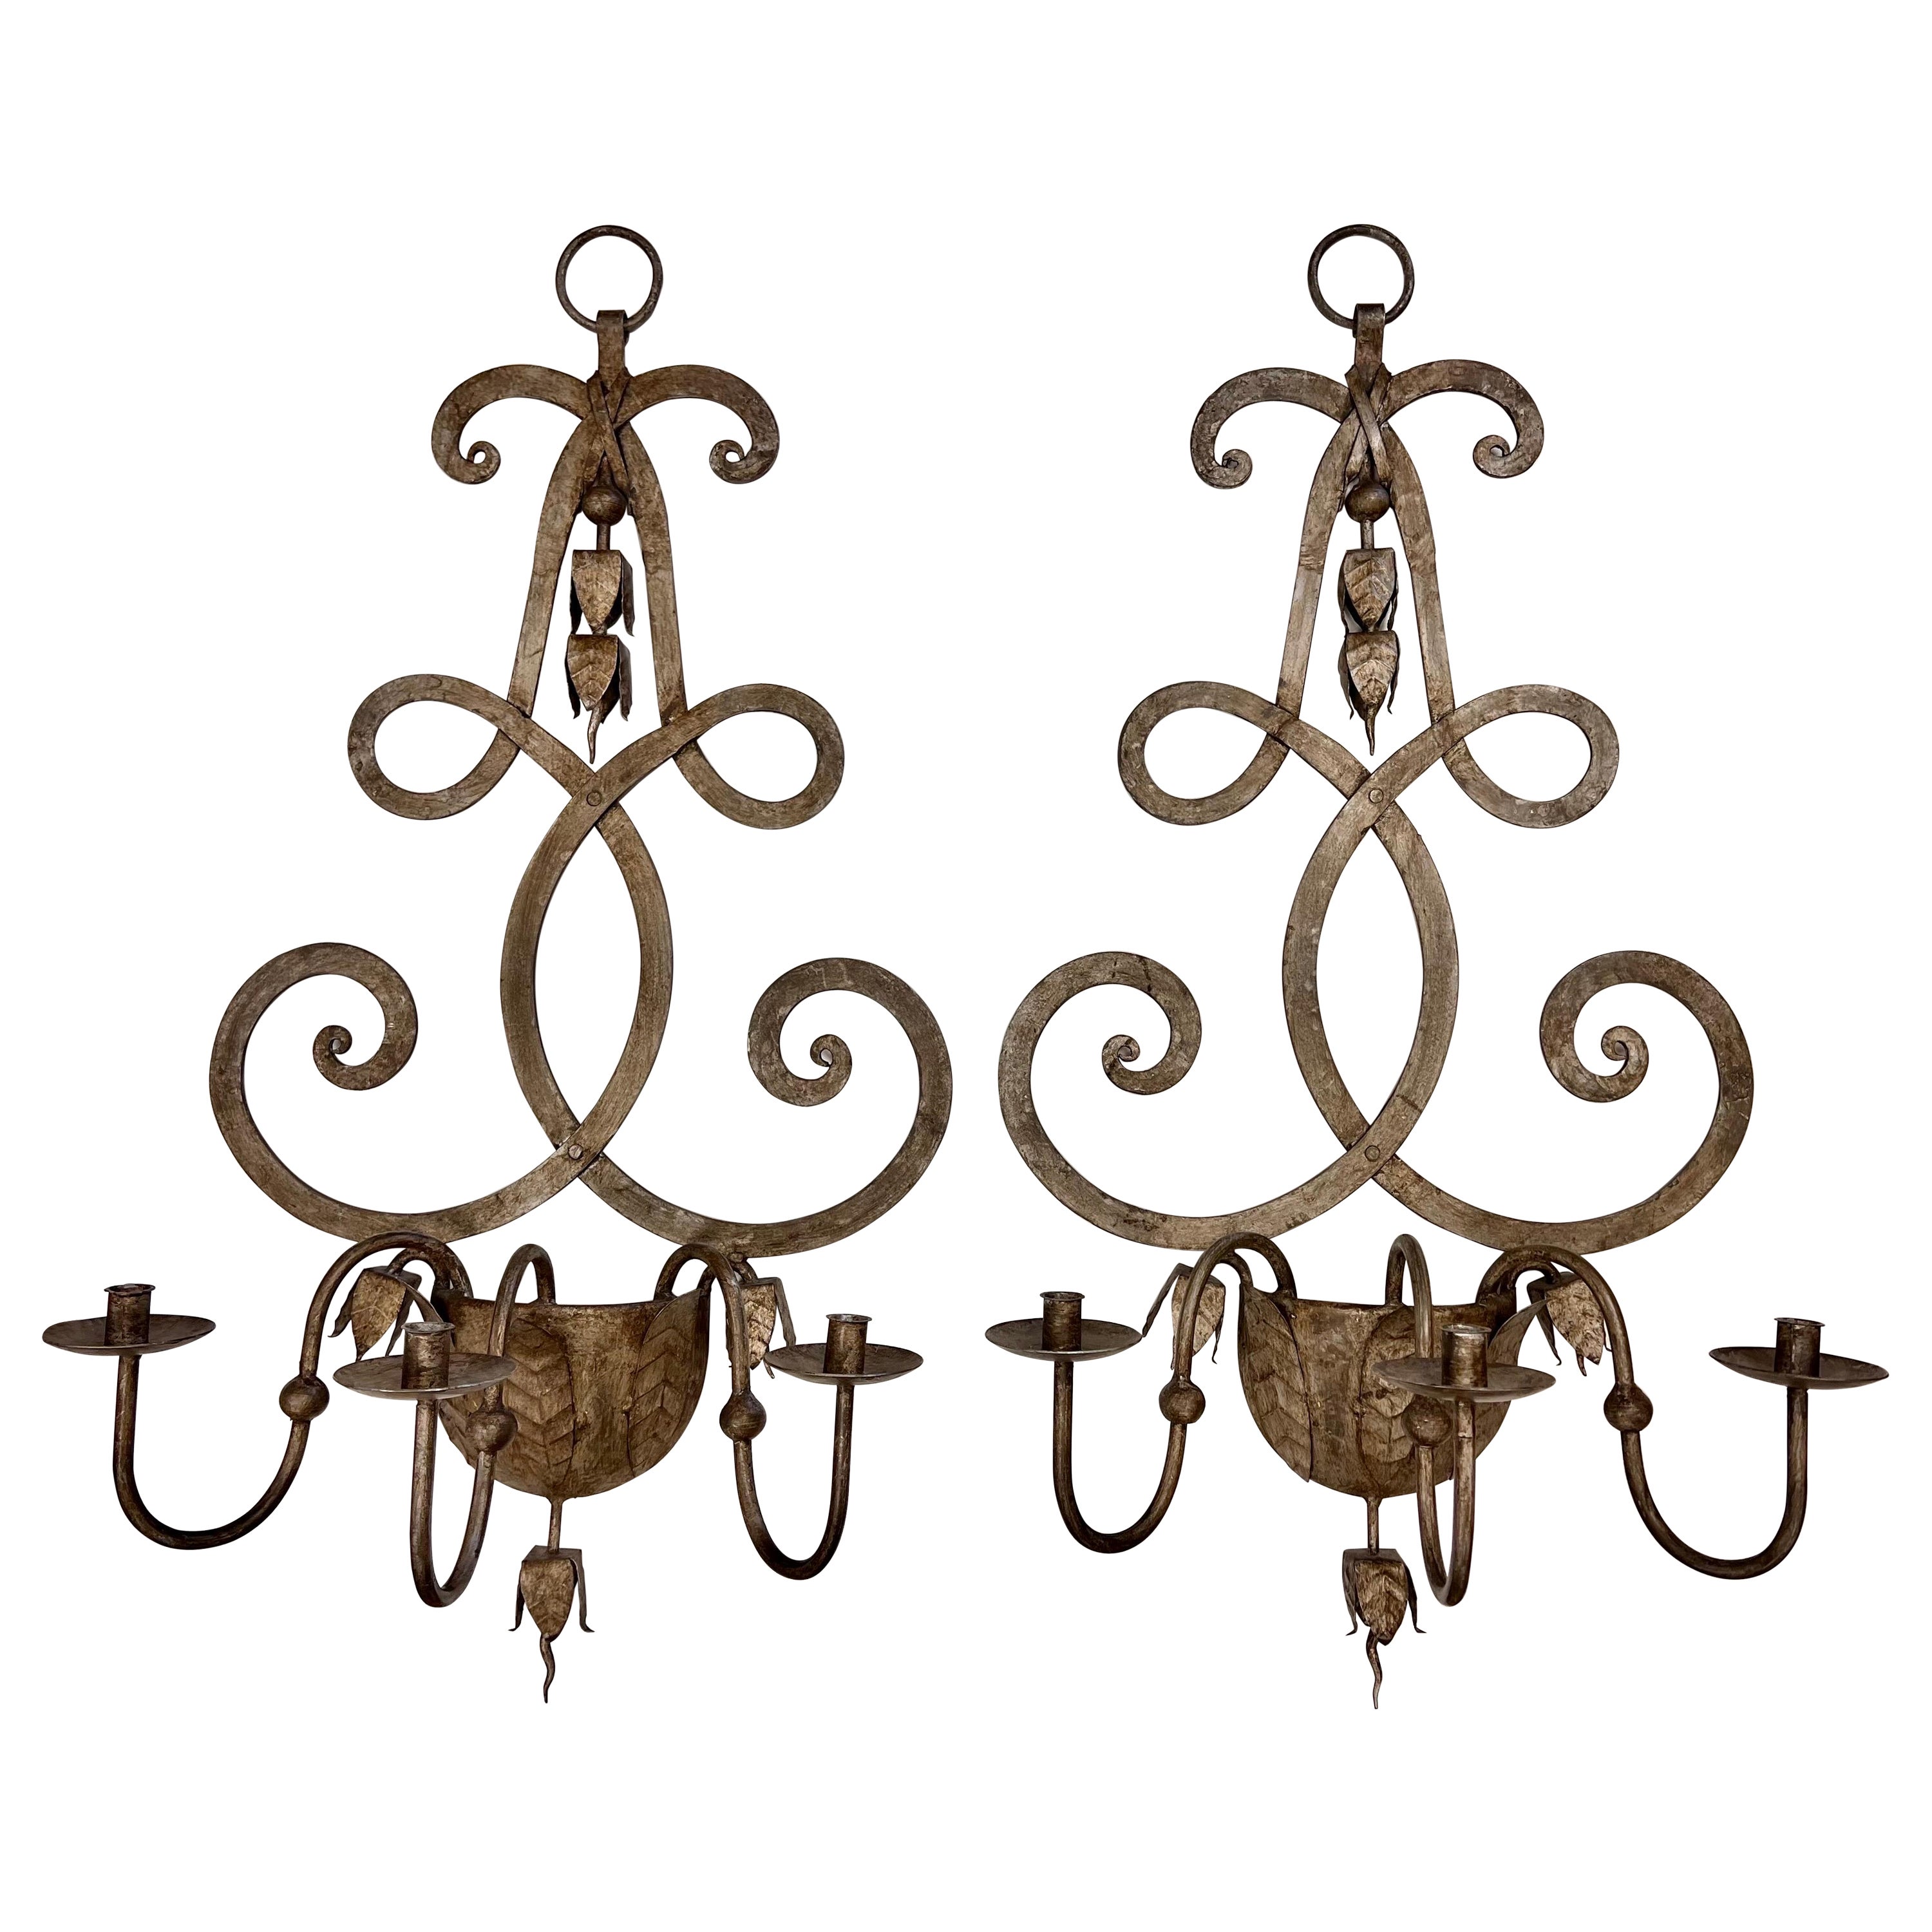 Bespoke Rococo Style Large Heavy Tole Candle Wall Sconces For Sale